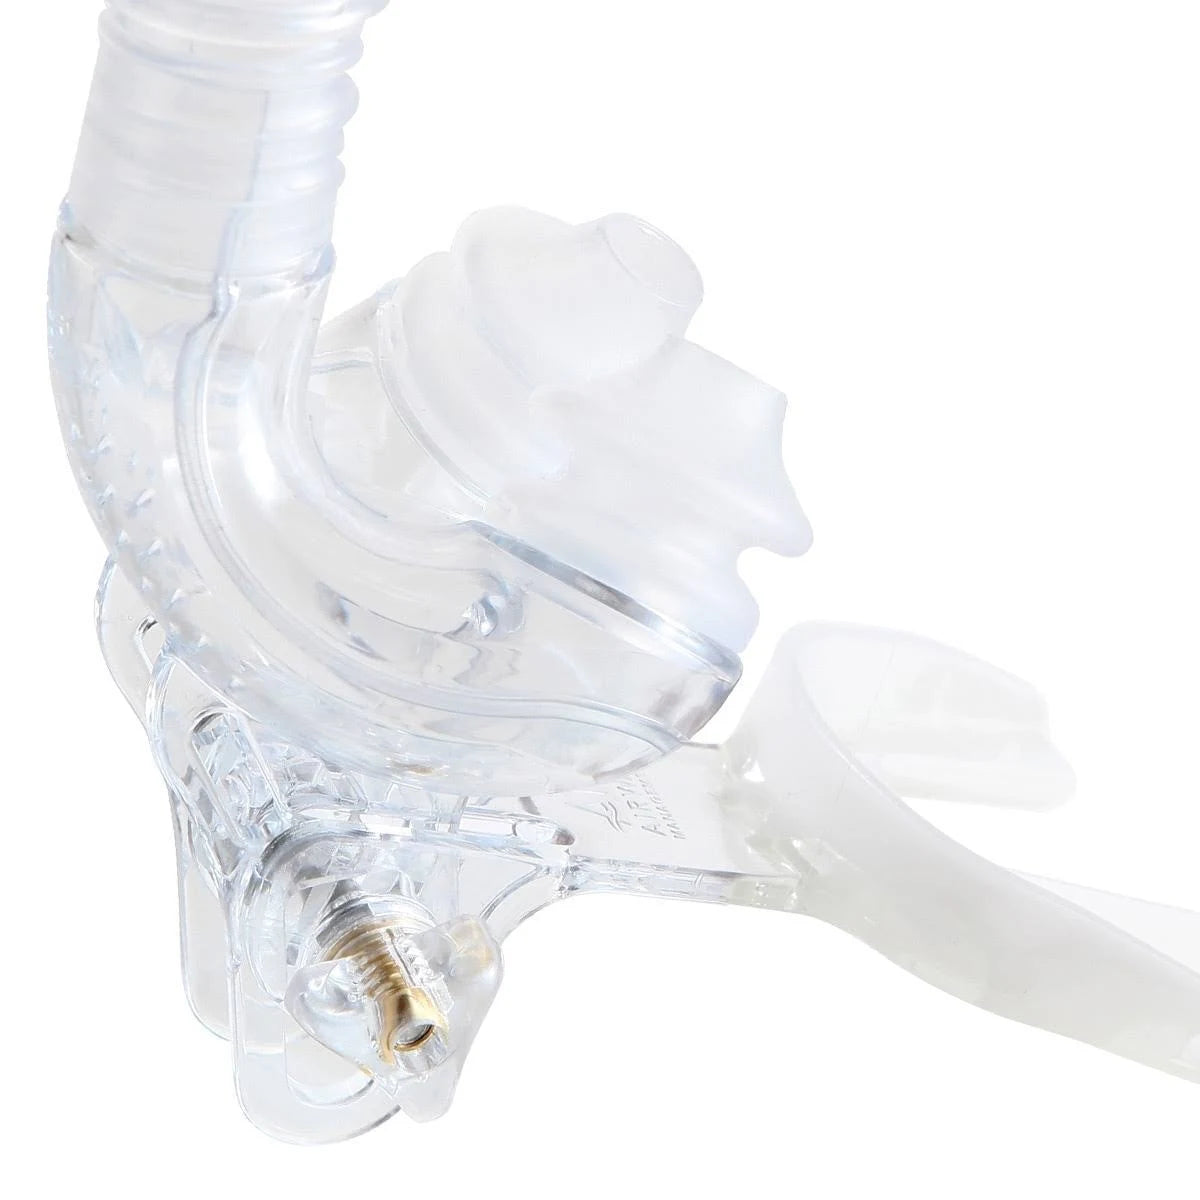 tap pap cpap mask cushion replacement